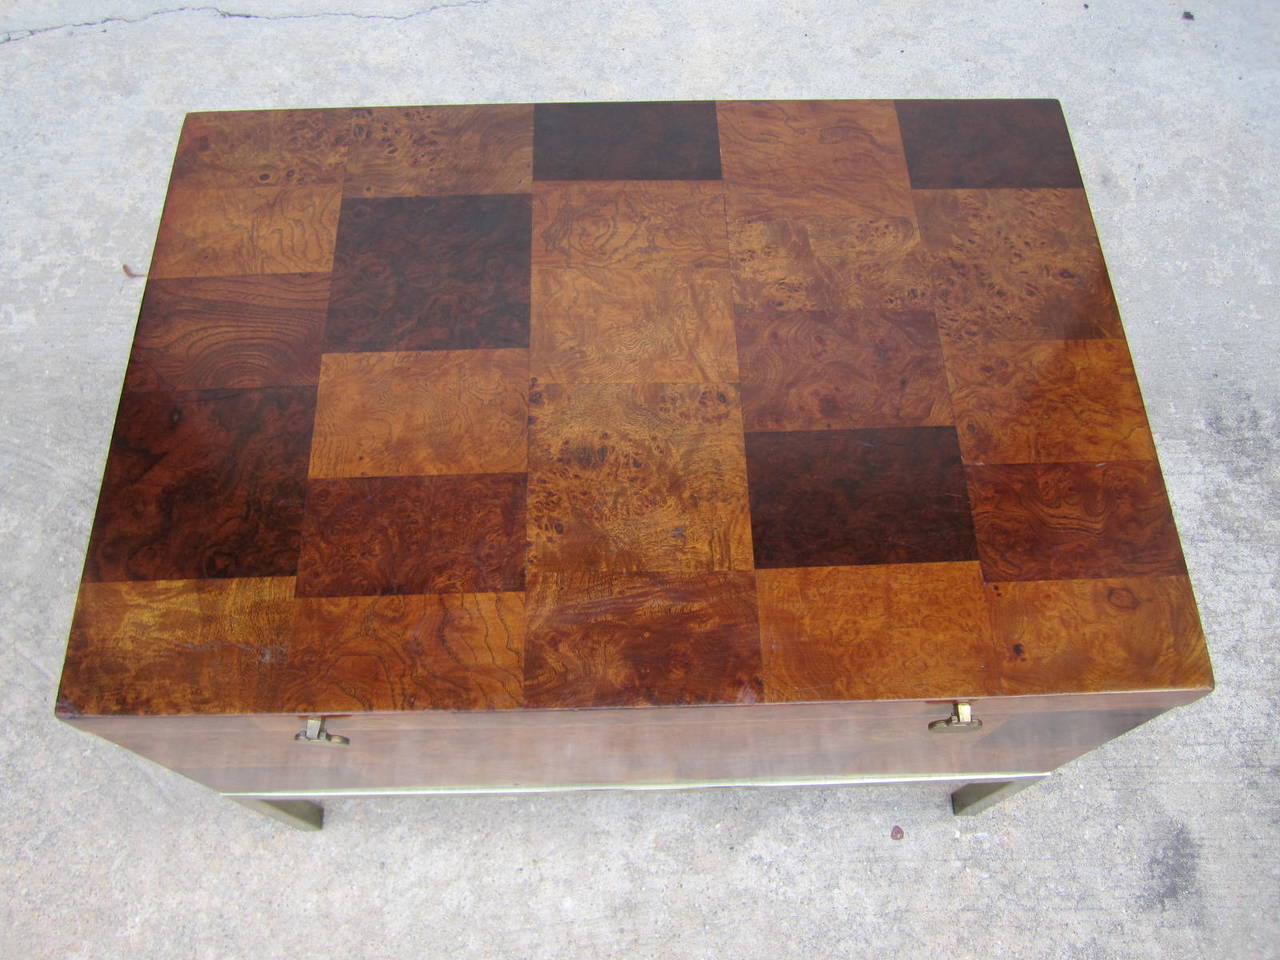 Handsome Paul Evans style burled walnut patchwork end table chest. We love the lid that lifts up to reveal tons on space inside. This piece has great vintage appeal with just the right amount of wear-the kind that retailers now try to achieve for